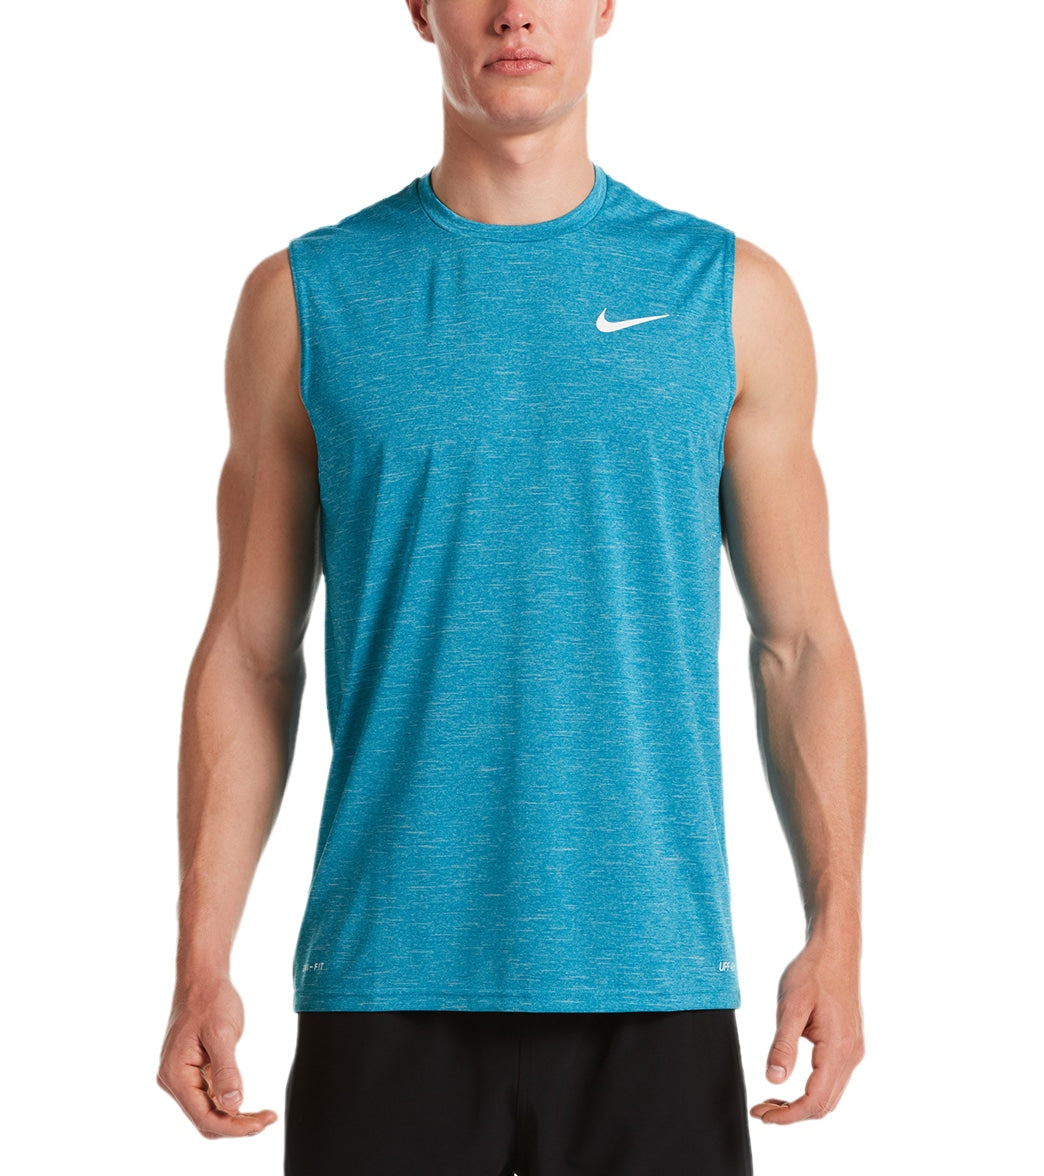 Nike Heather Sleeveless Hydroguard | peacecommission.kdsg.gov.ng